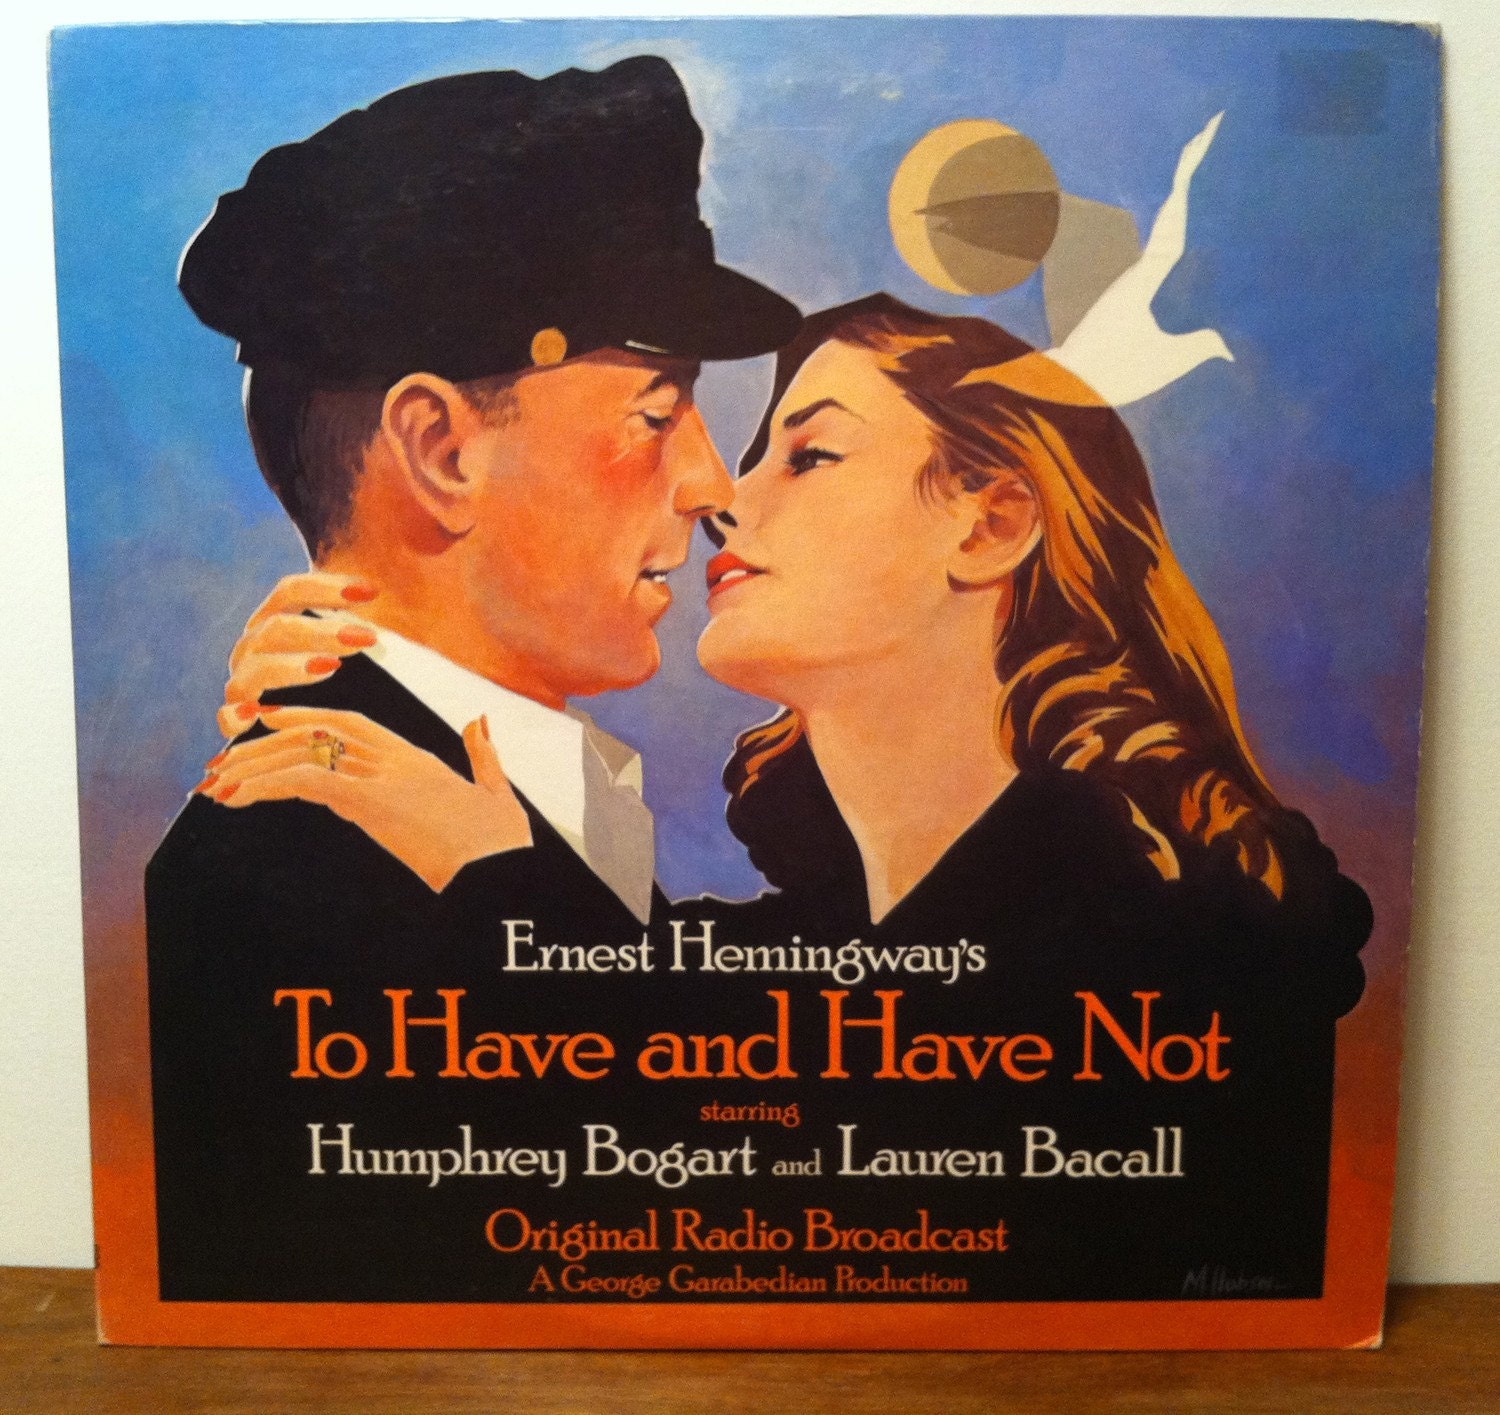 Ernest Hemingway's To Have and Have Not (LP)